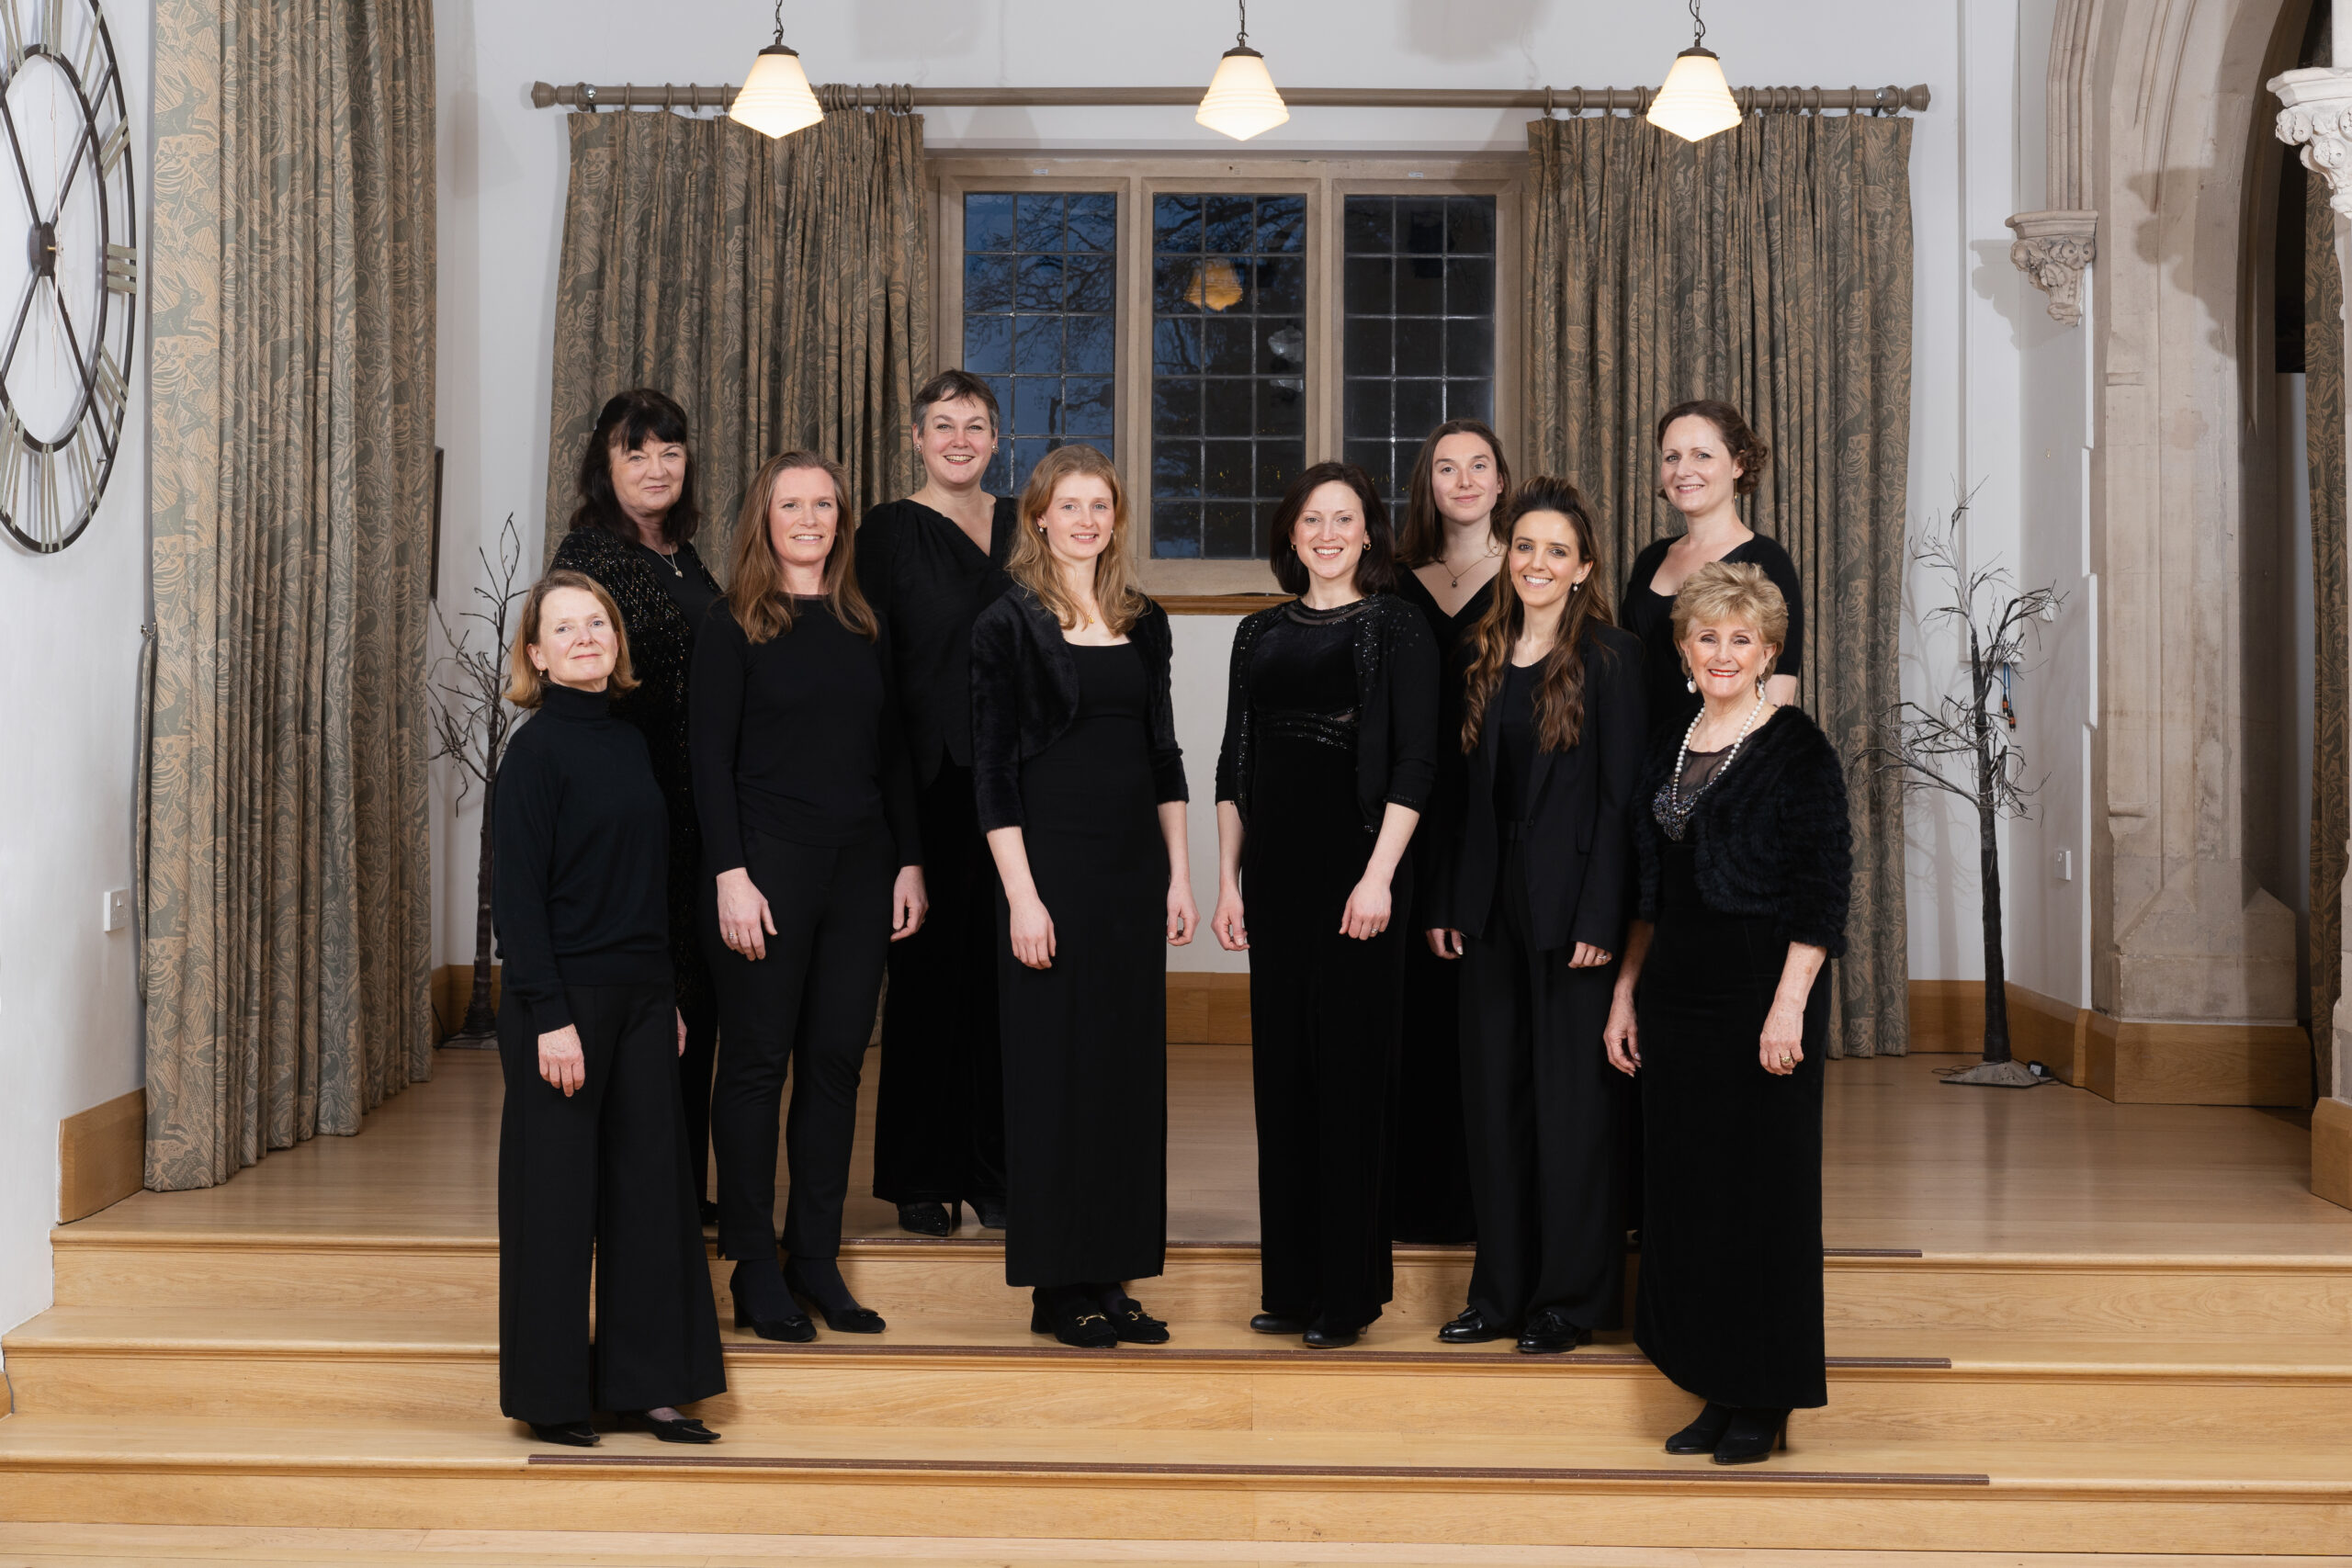 Saturday 1 June 3:30pm - The Jenny Lind Singers In Concert at Worcester Guildhall